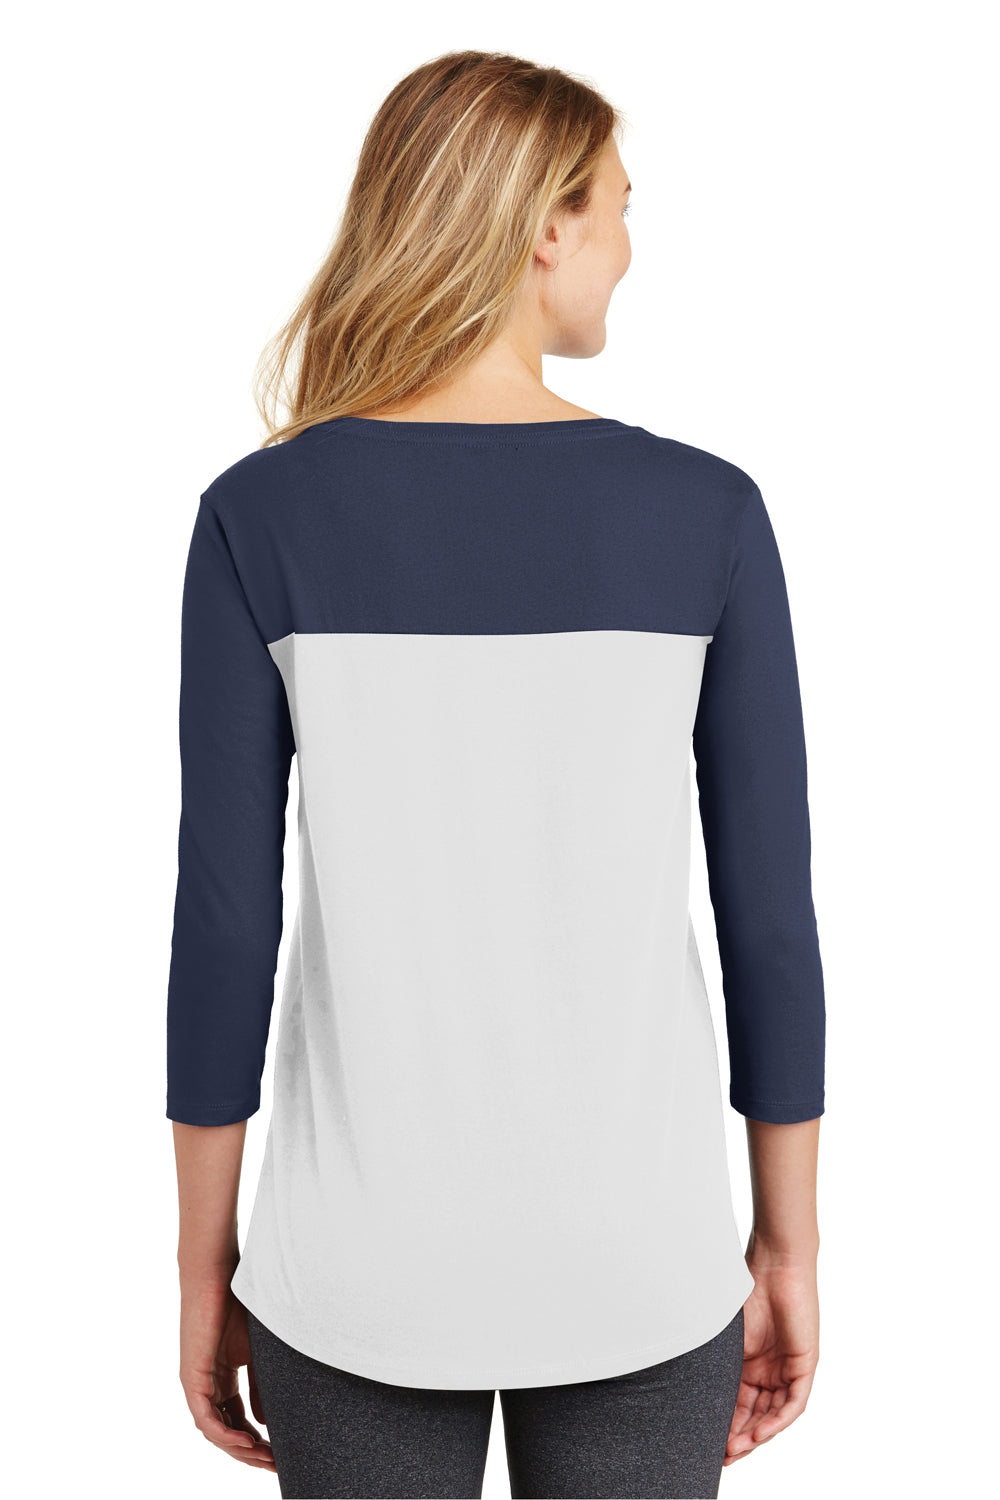 District DT2700 Womens Rally 3/4 Sleeve Wide Neck T-Shirt White/Navy Blue Back